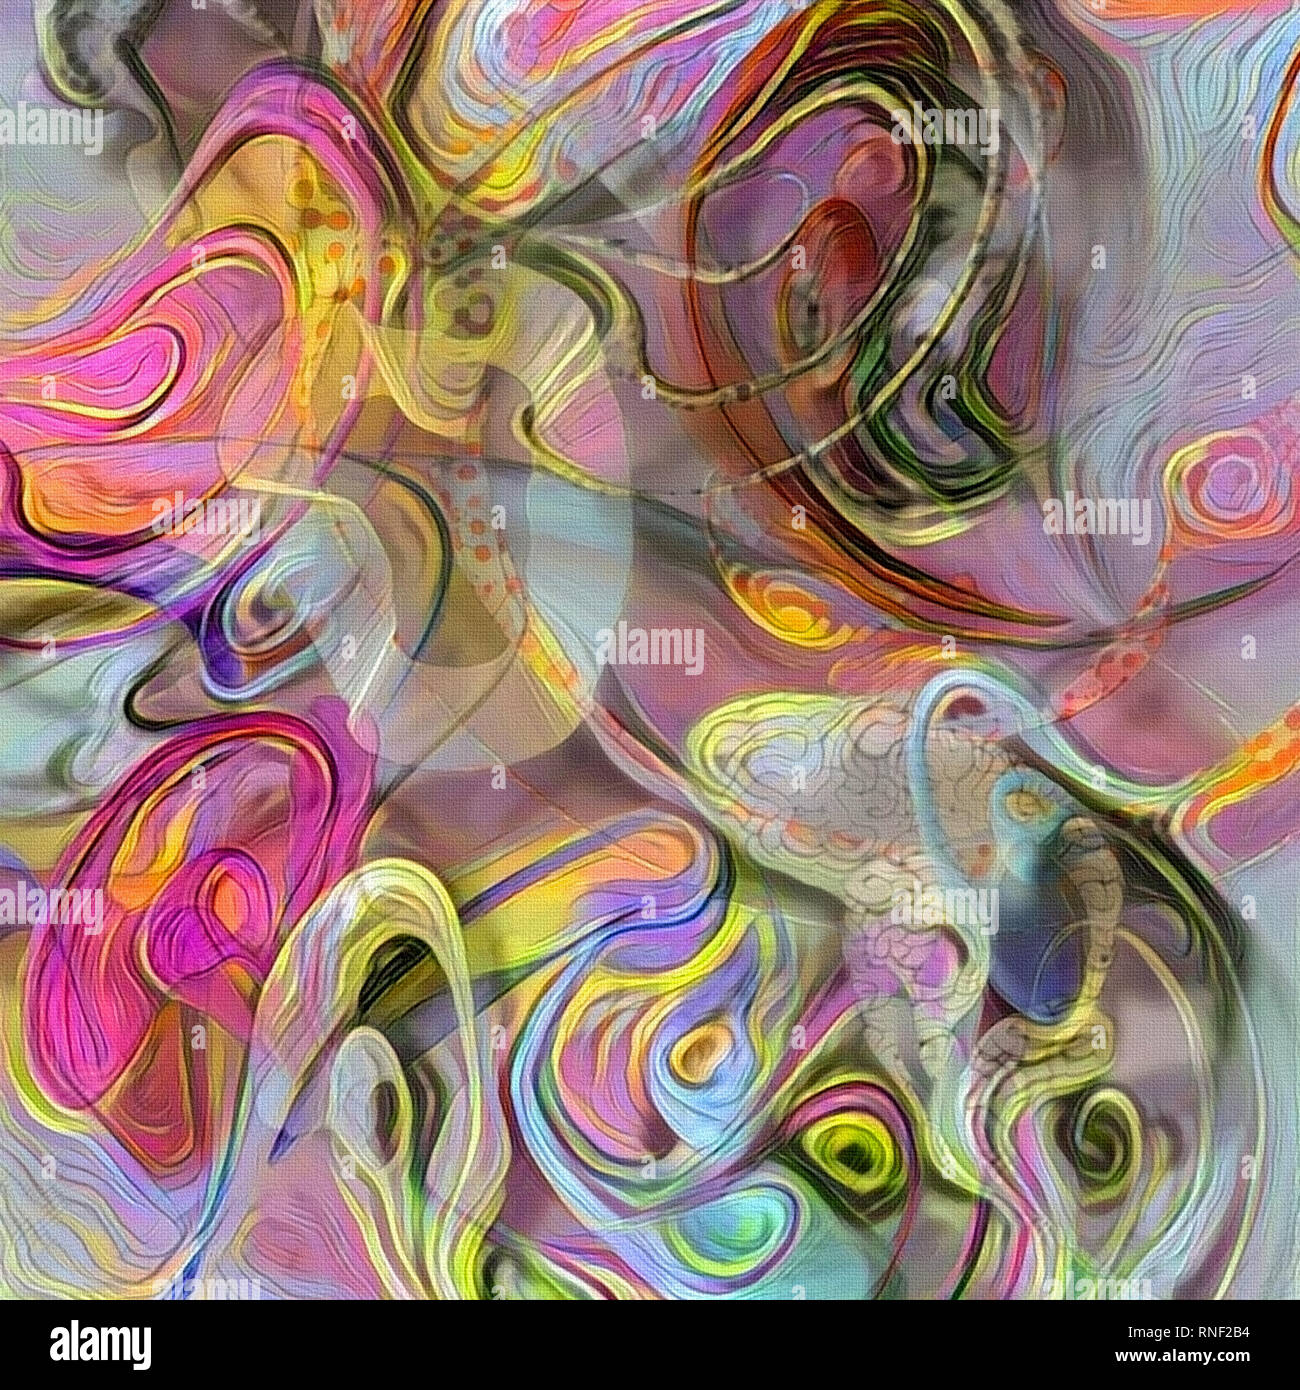 Colorful painting with abstracted forms Stock Photo